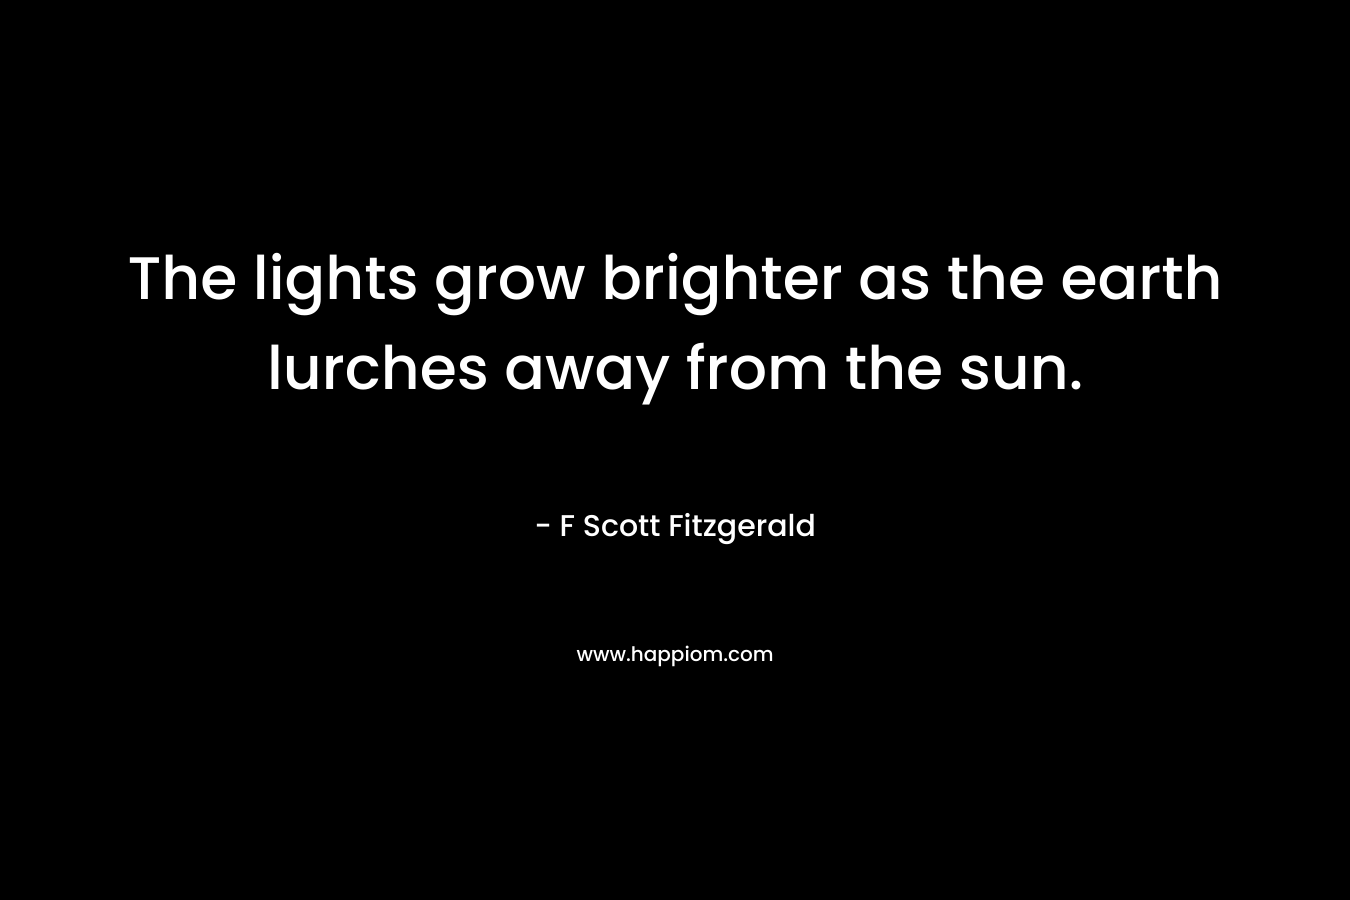 The lights grow brighter as the earth lurches away from the sun. – F Scott Fitzgerald